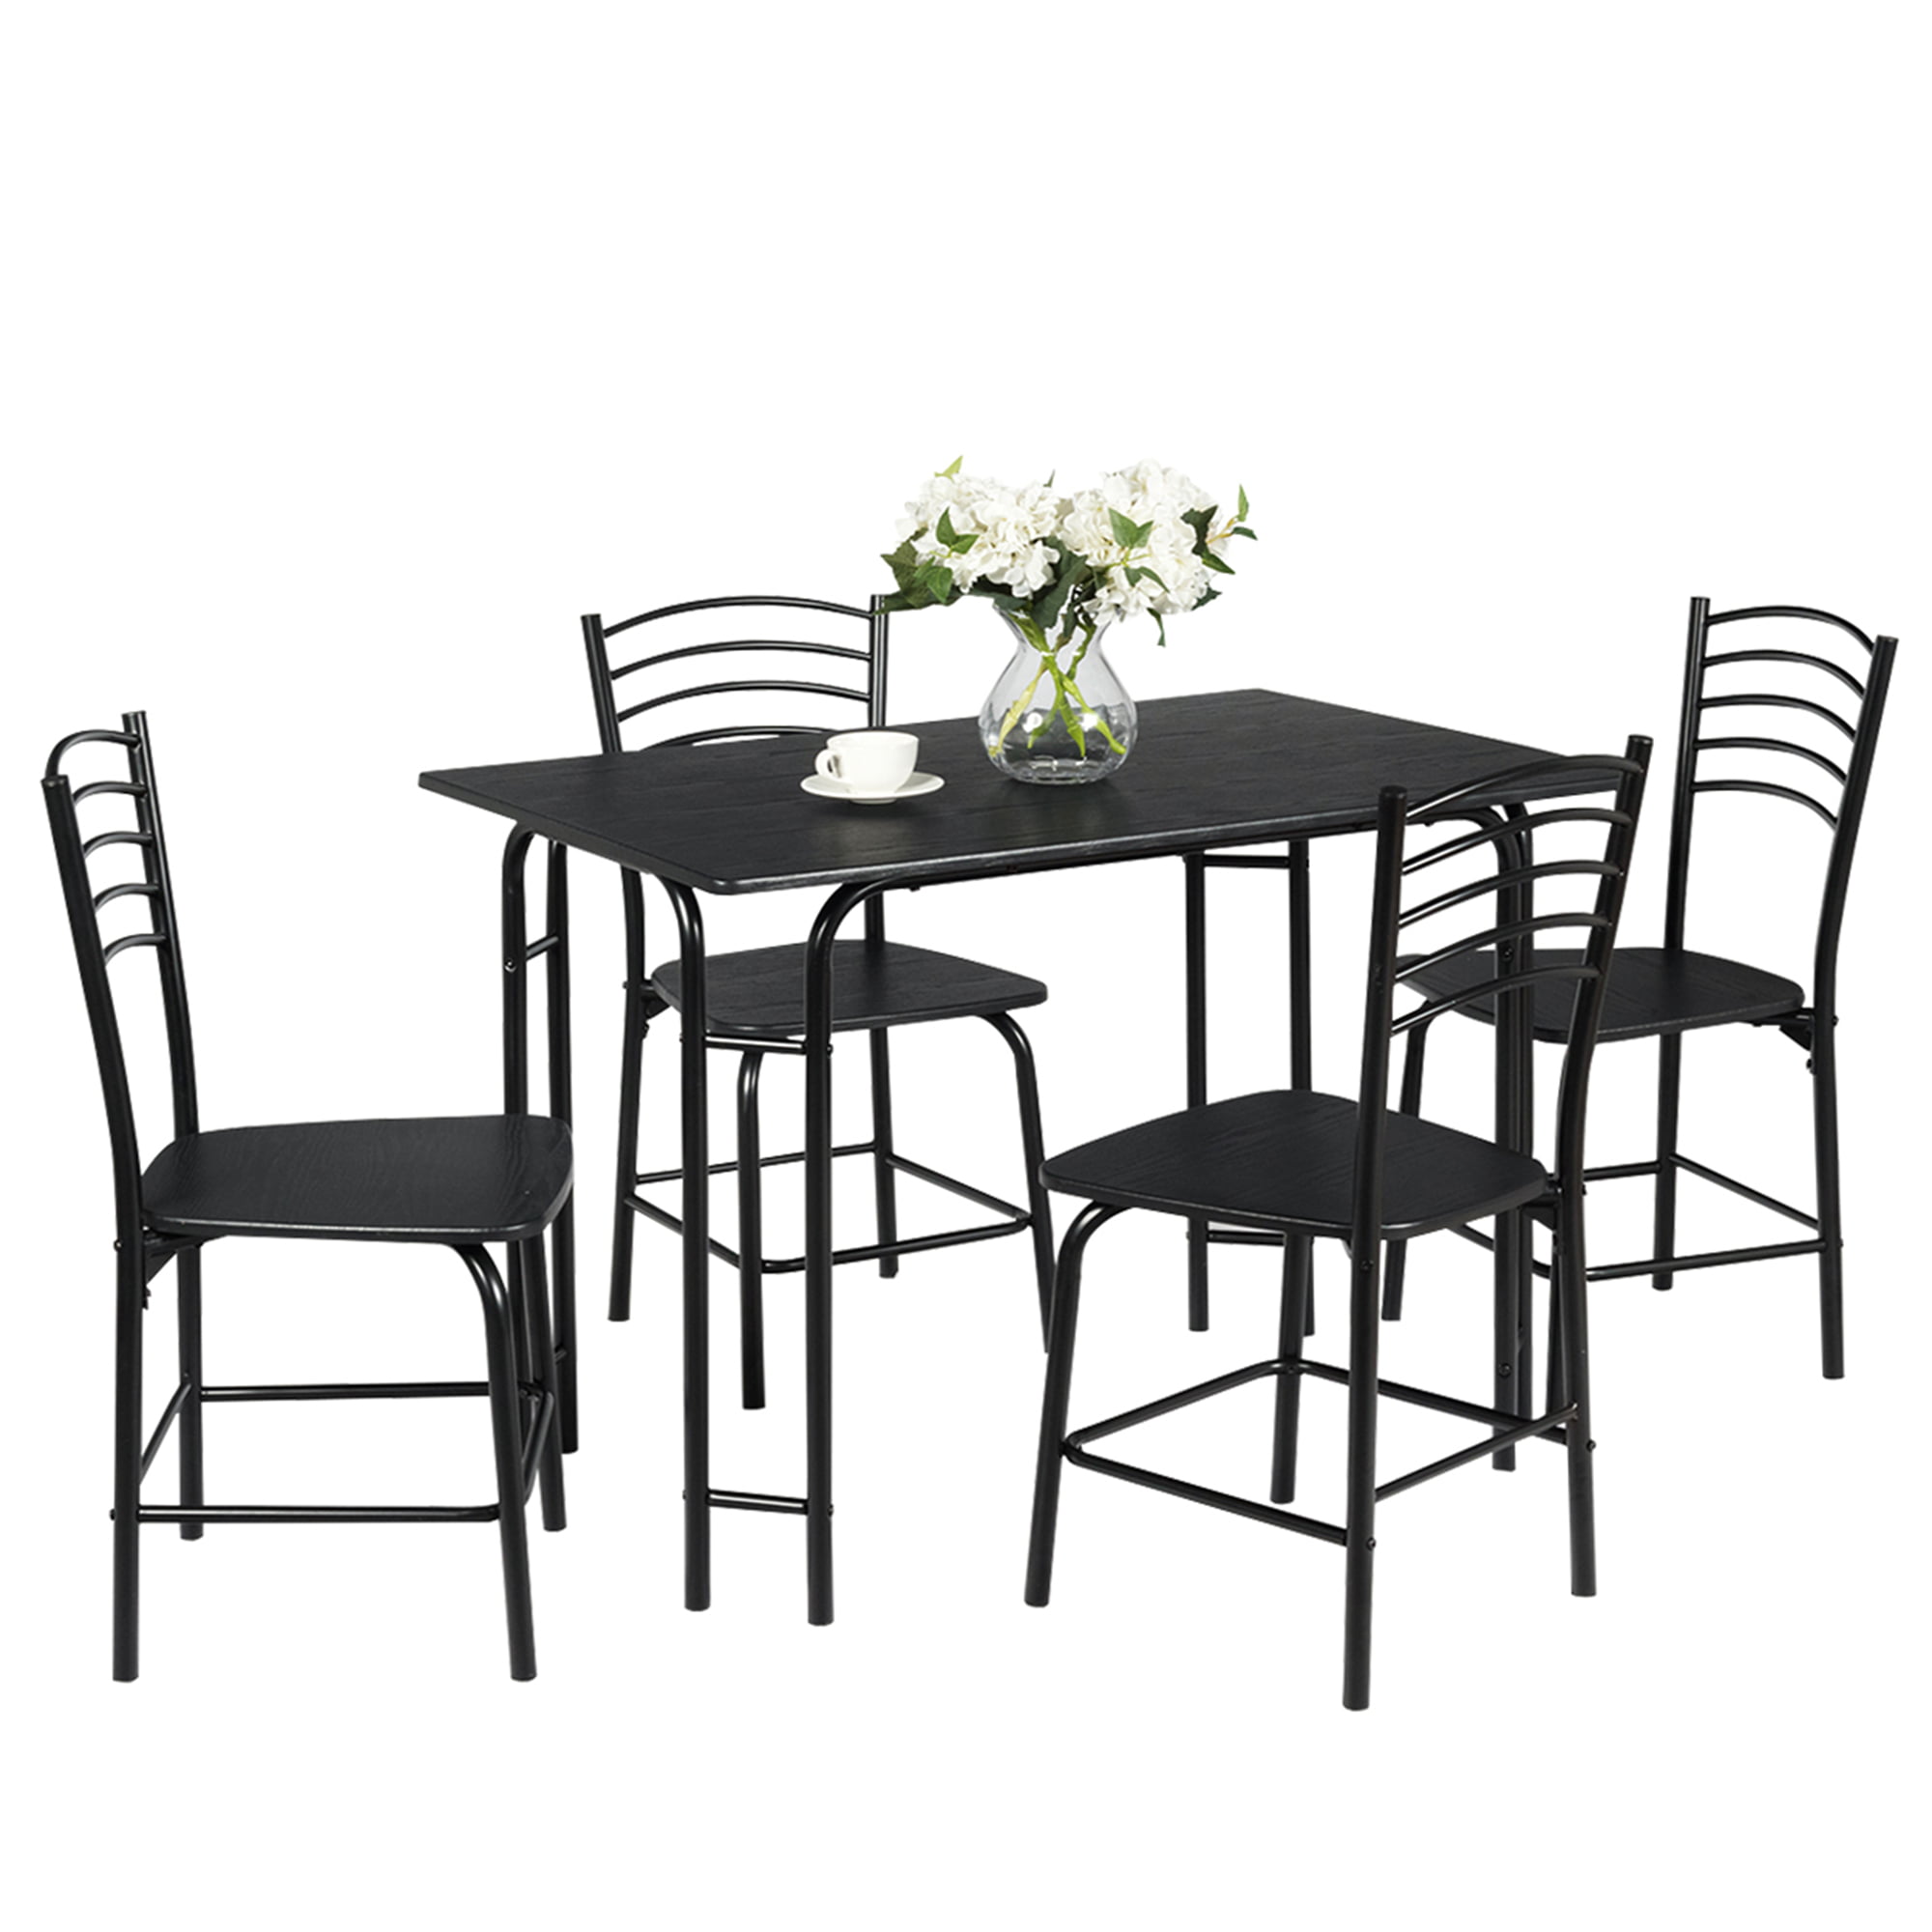 Costway 5 Piece Dining Set Home Kitchen Table and 4 Chairs with Metal